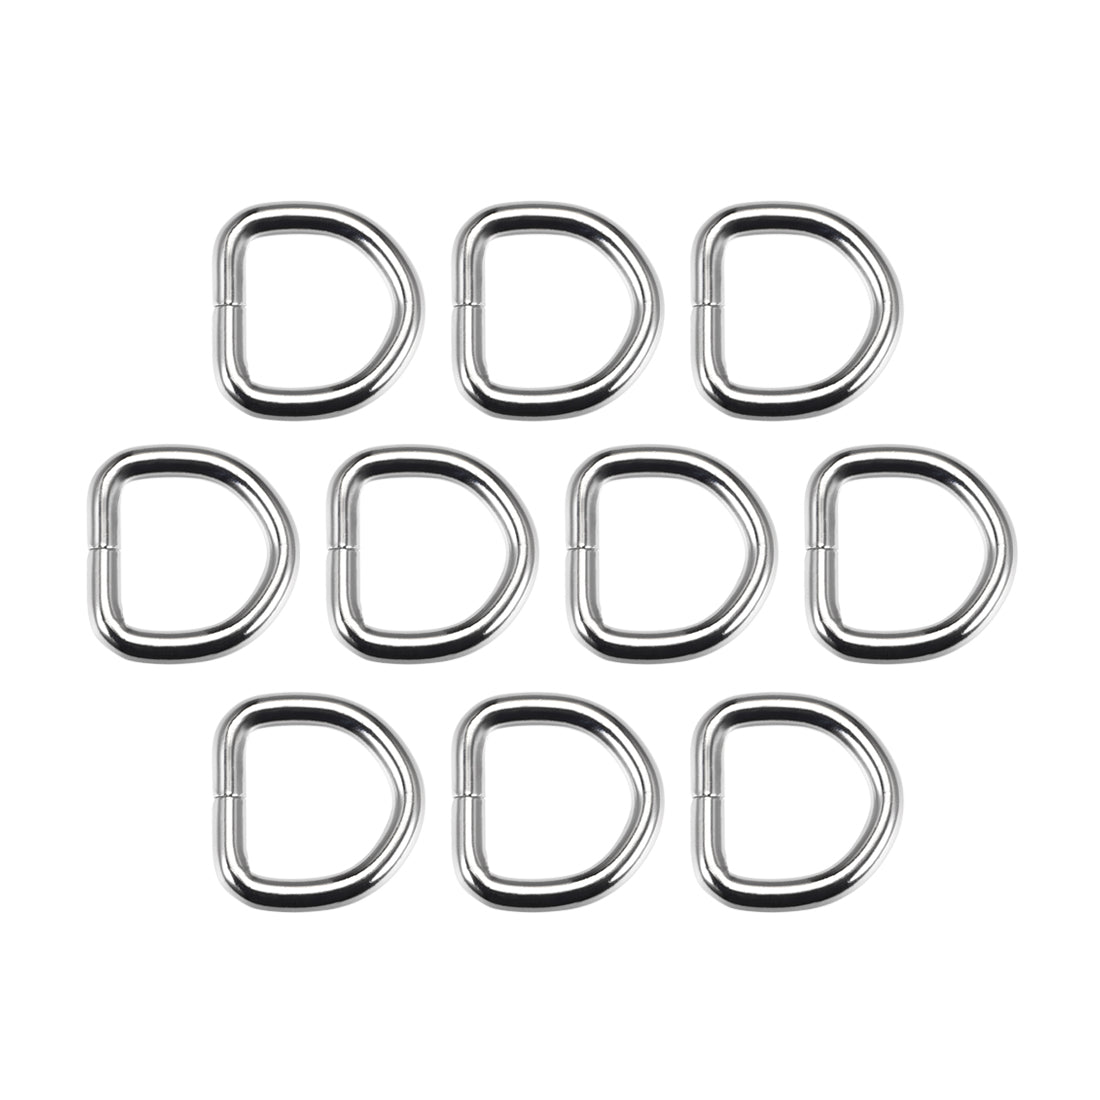 uxcell Uxcell 10 Pcs D Ring Buckle 0.8 Inch Metal Semi-Circular D-Rings Silver Tone for Hardware Bags Belts Craft DIY Accessories